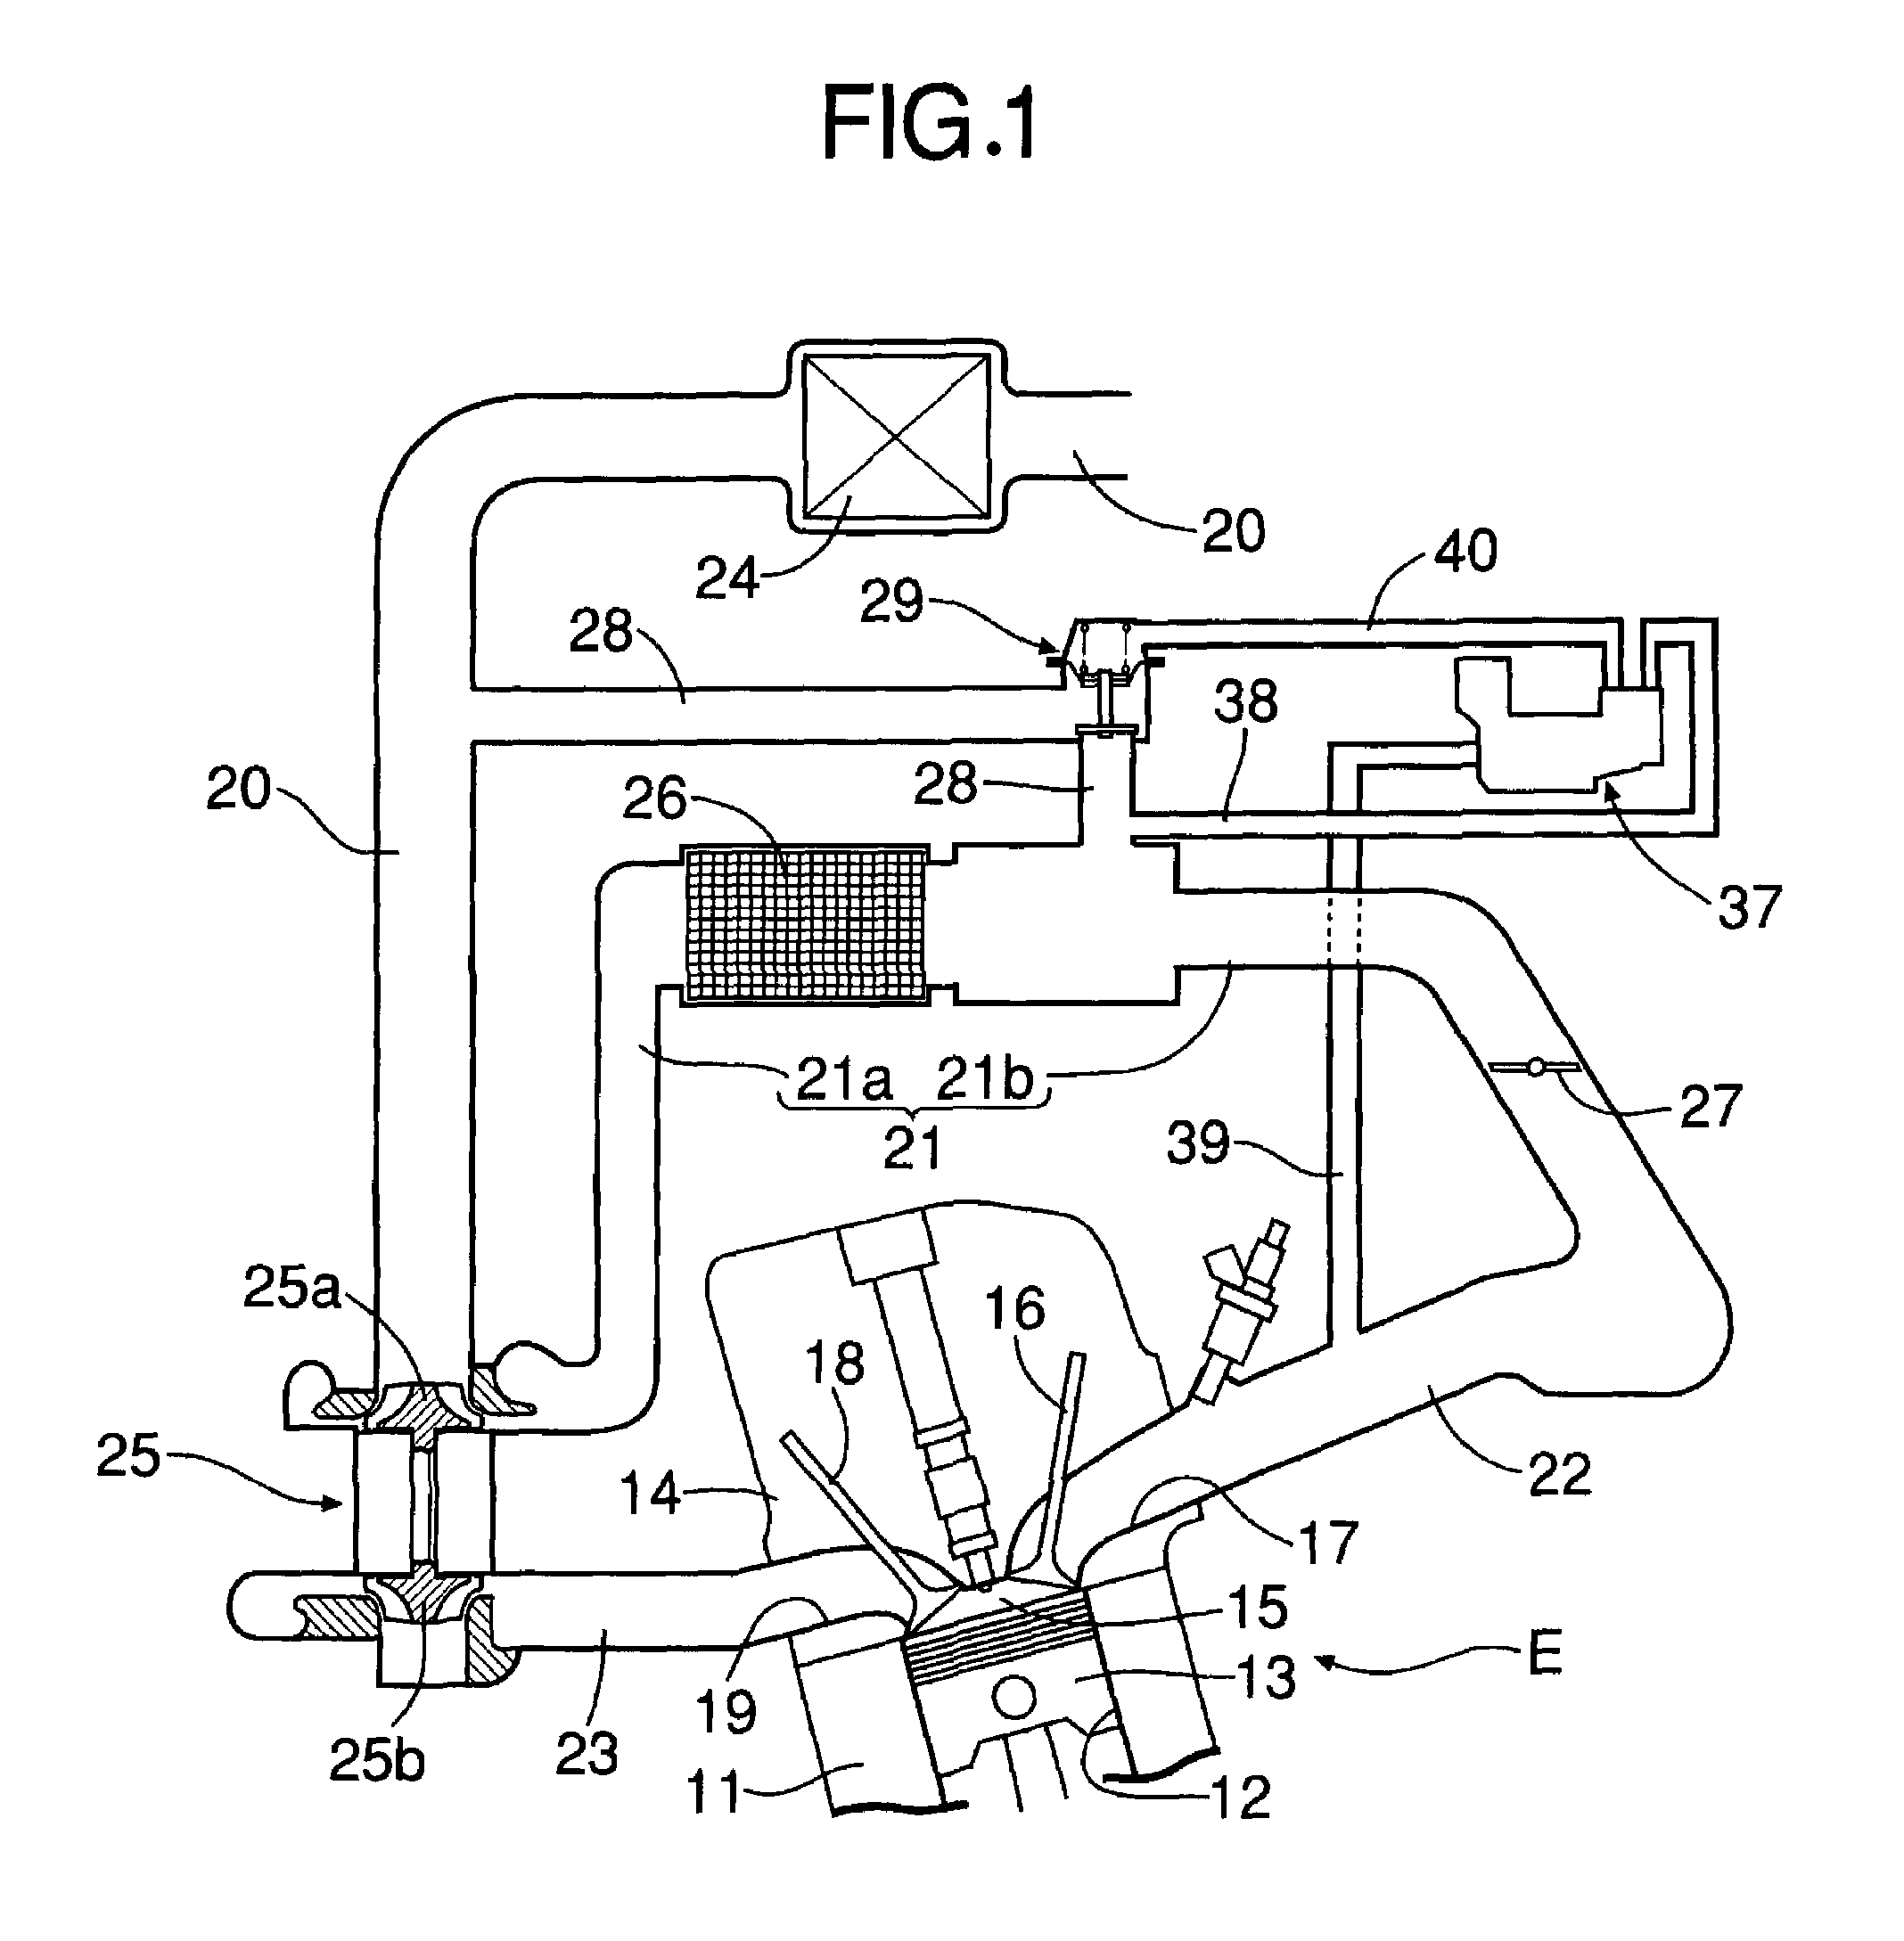 Air bypass valve failure detection device in supercharging device for engine